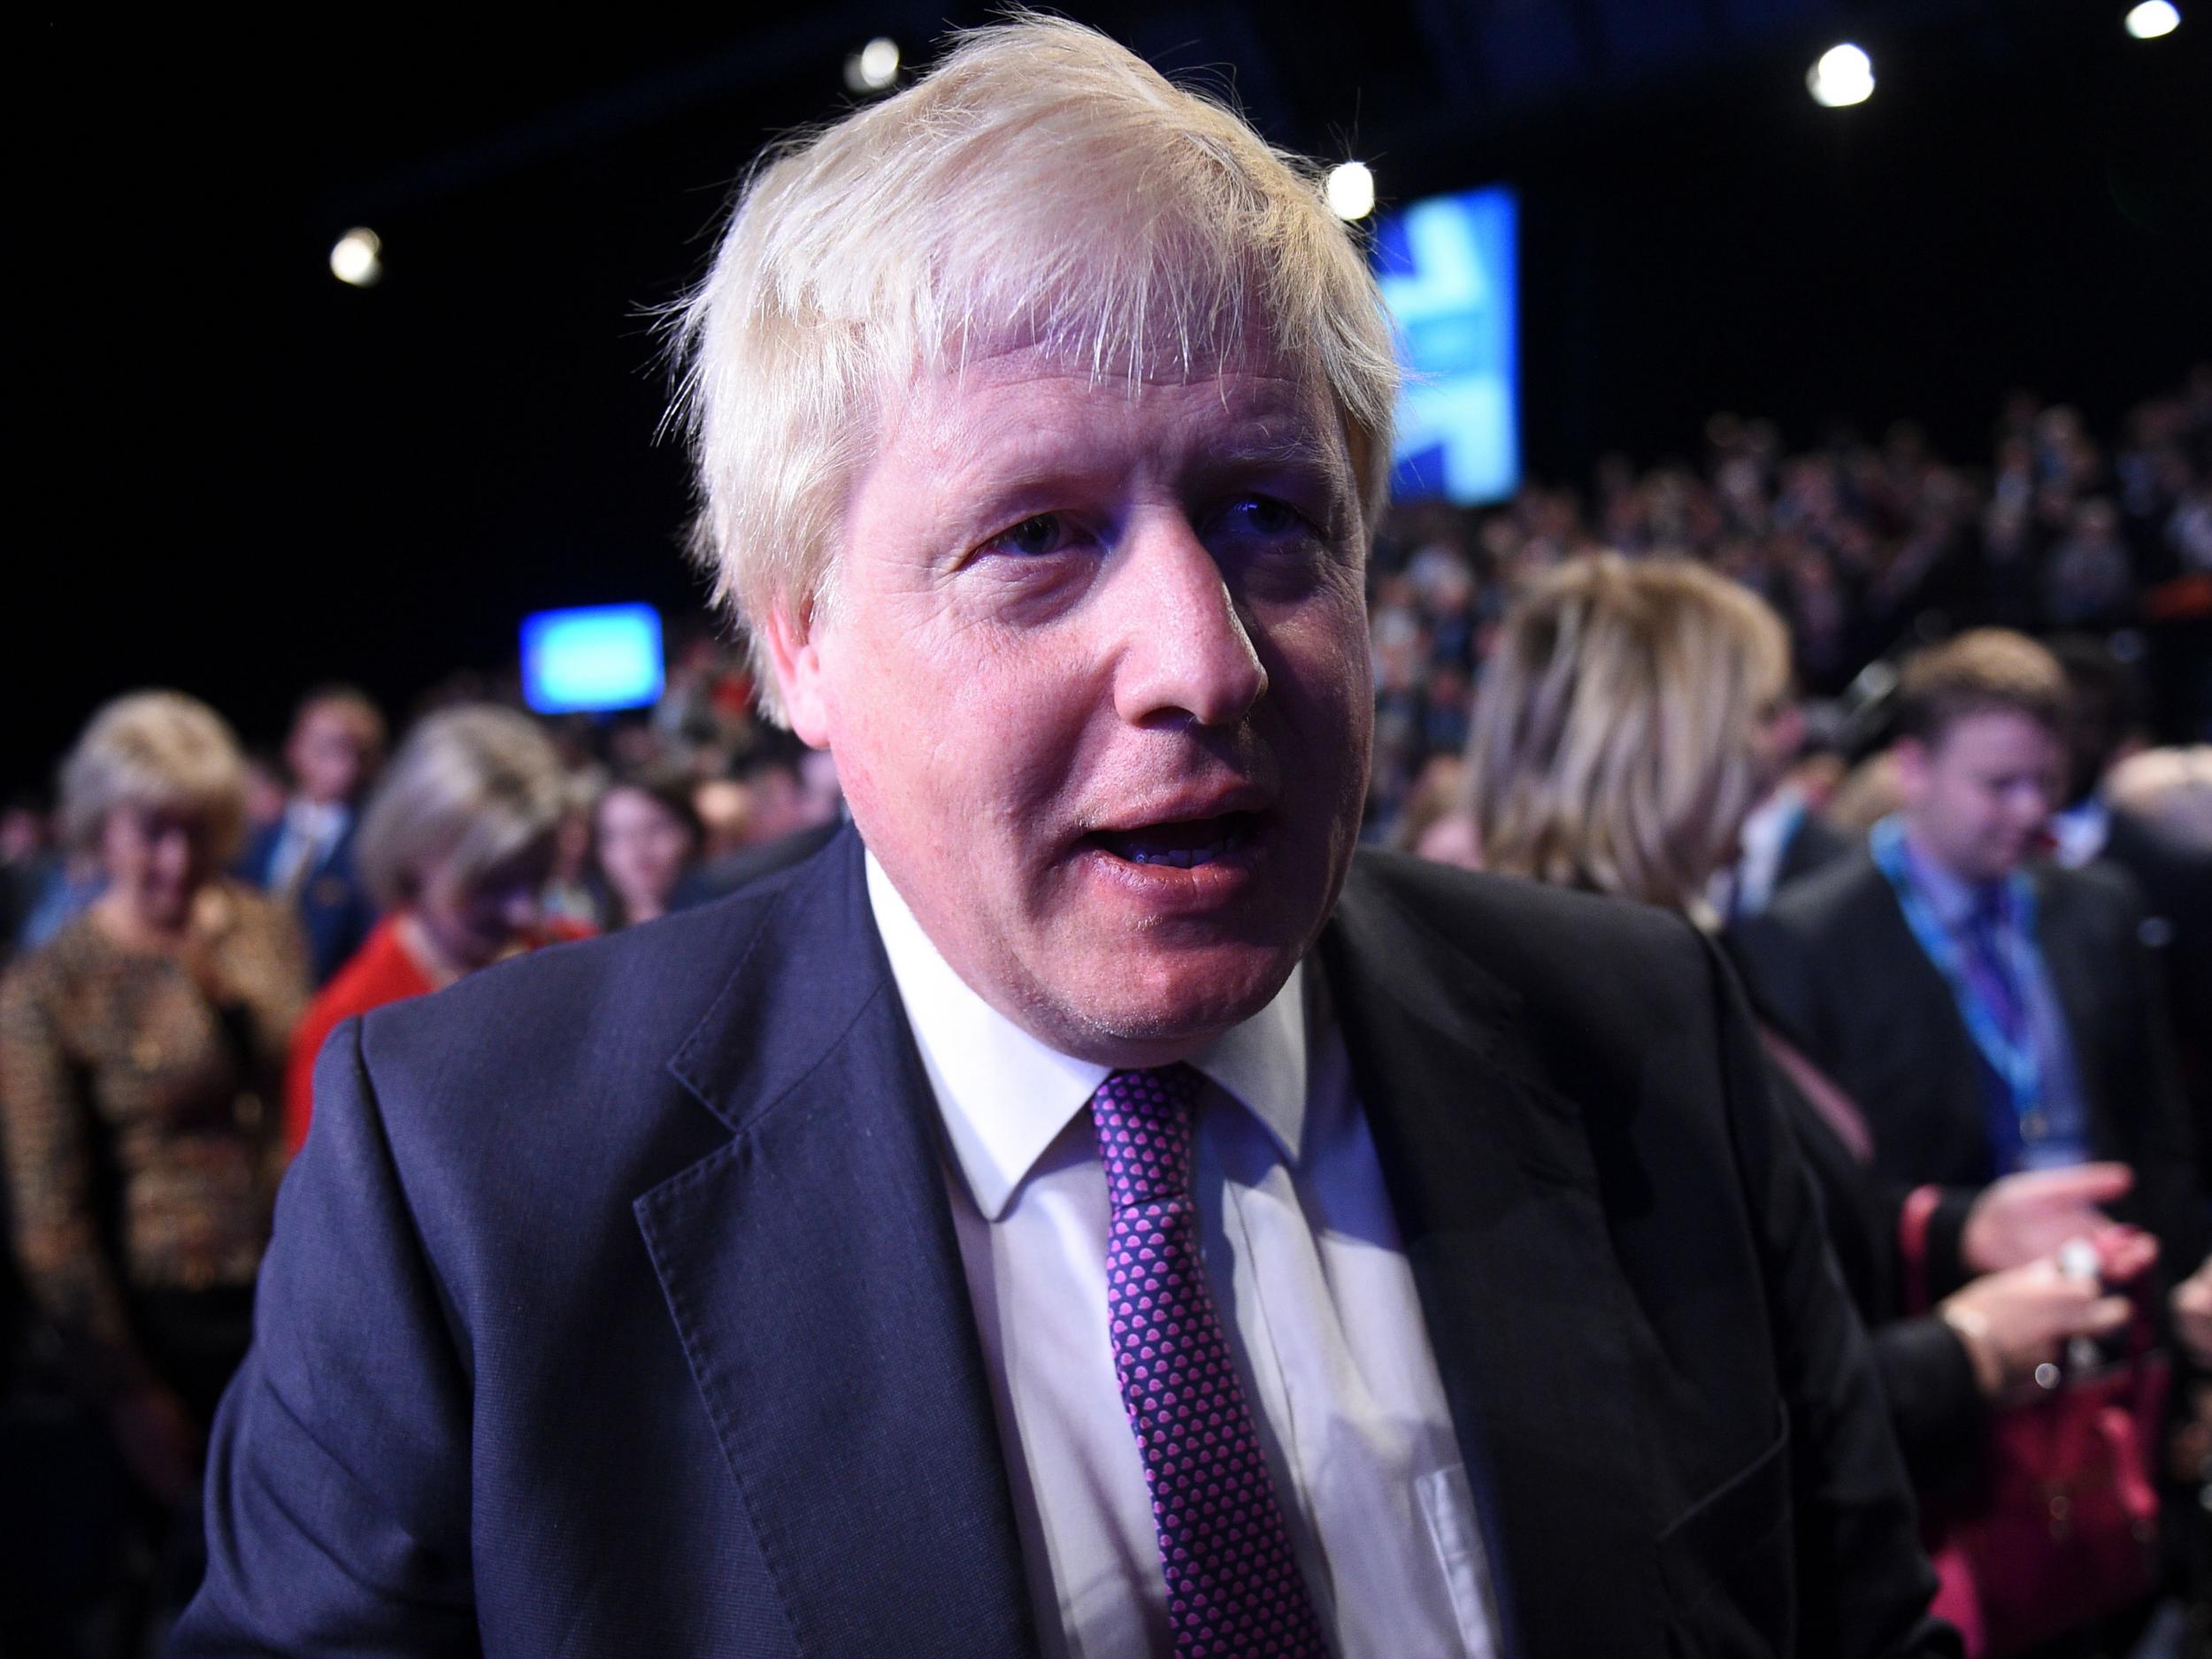 Boris got us into this mess – so it's time he got us out of it as well